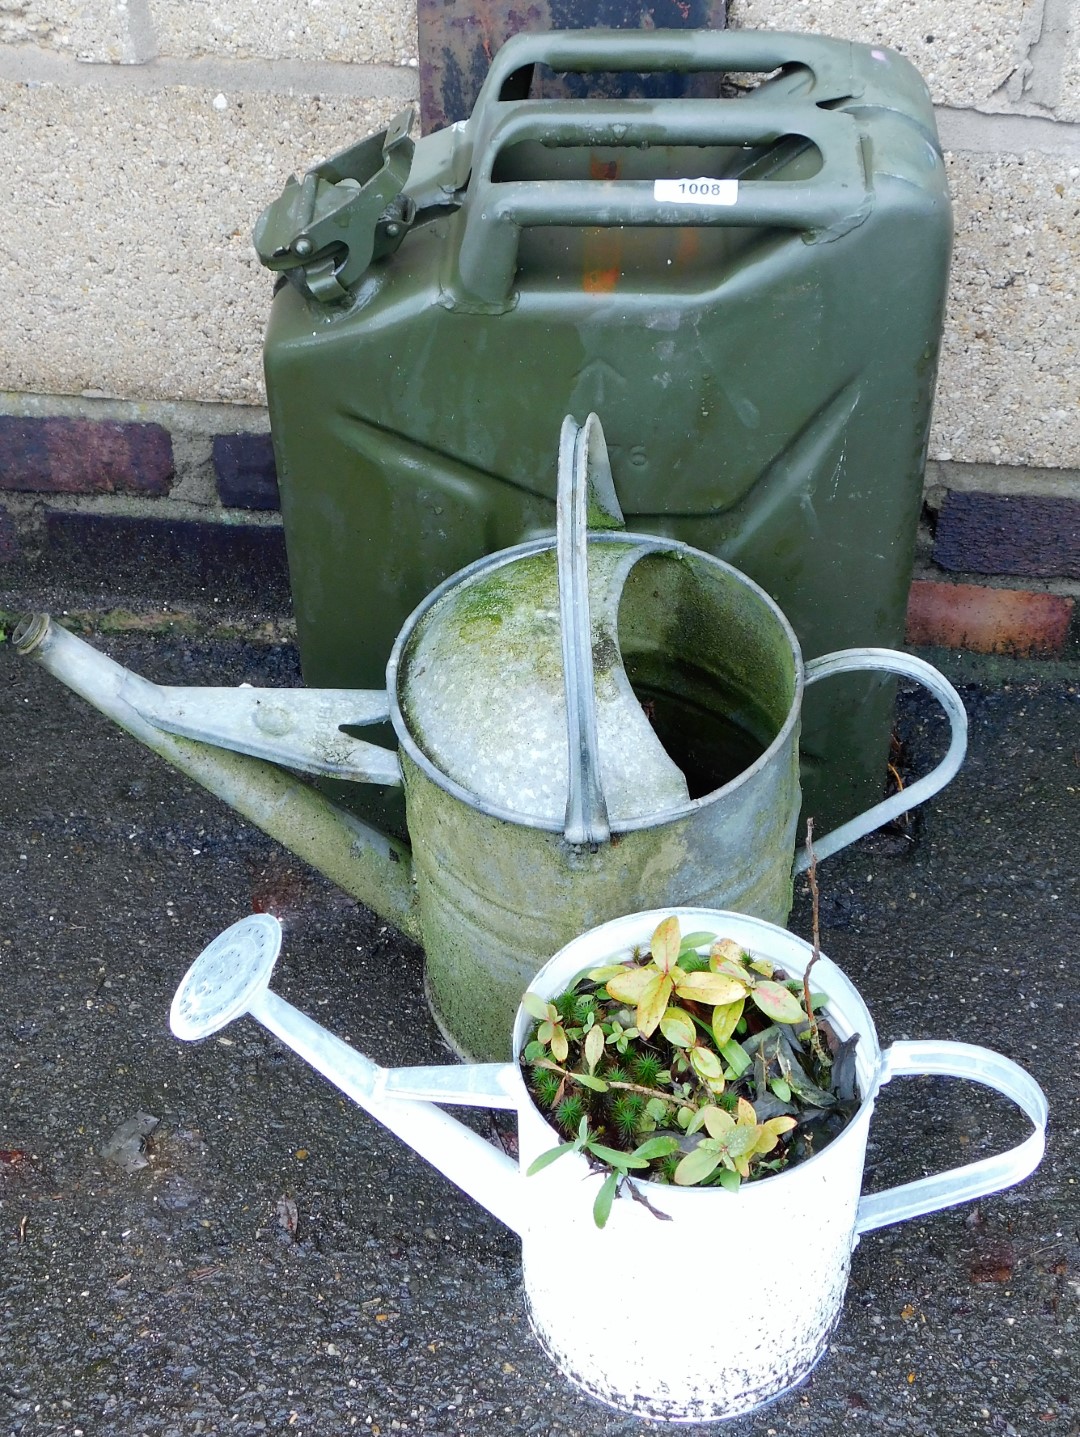 A military oil can and two watering cans. (3)